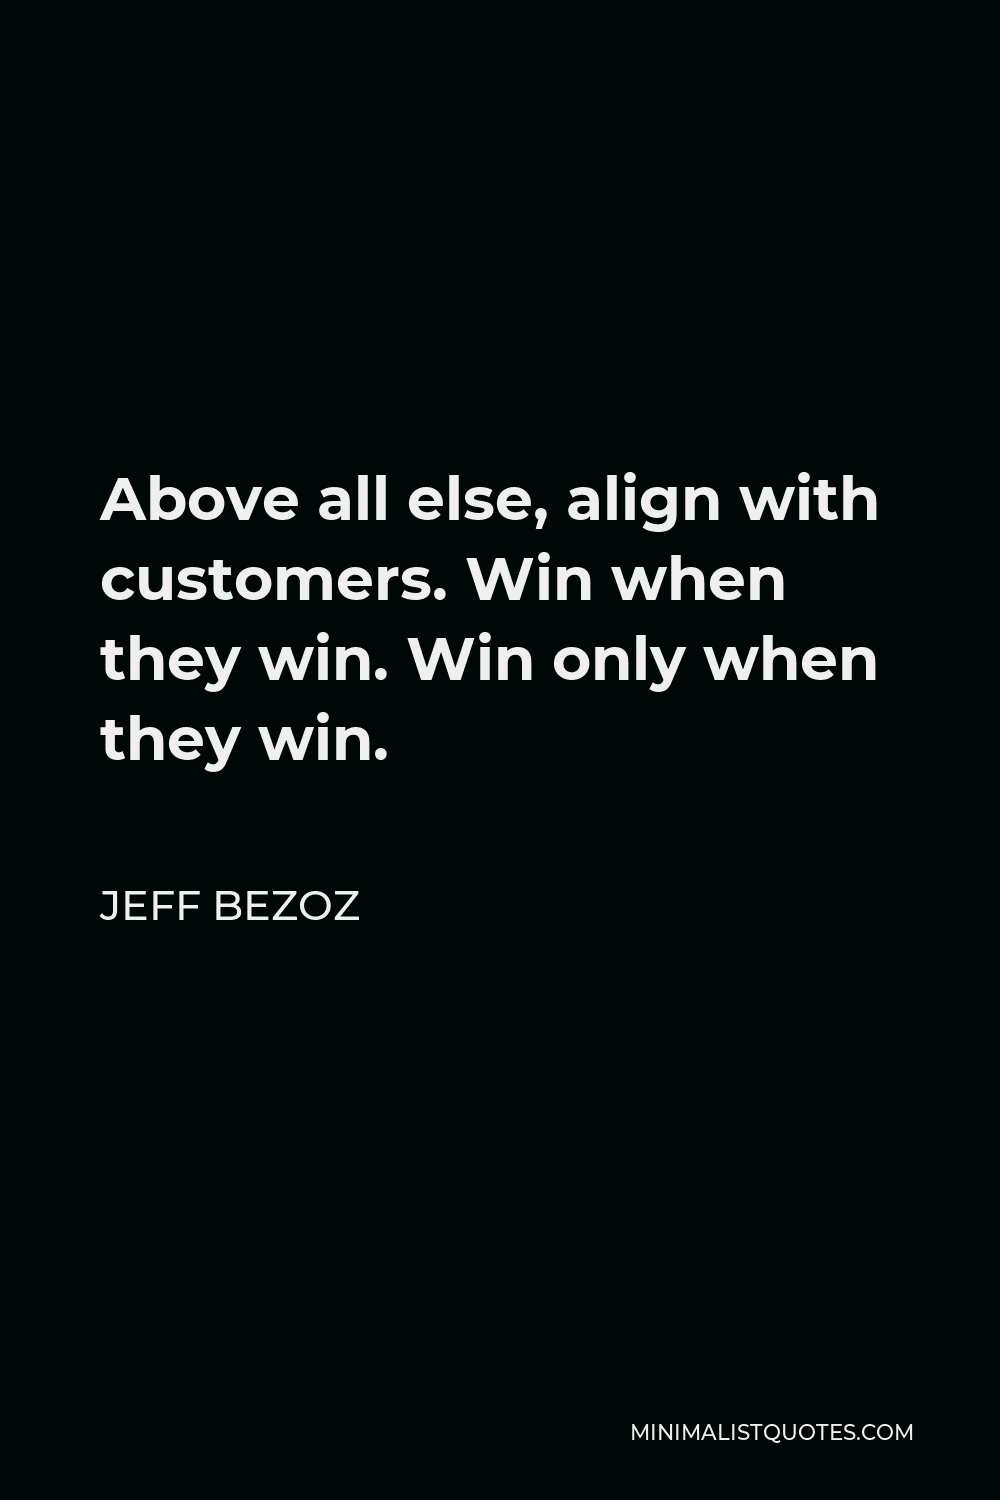 Jeff Bezoz Quote - Above all else, align with customers. Win when they win. Win only when they win.